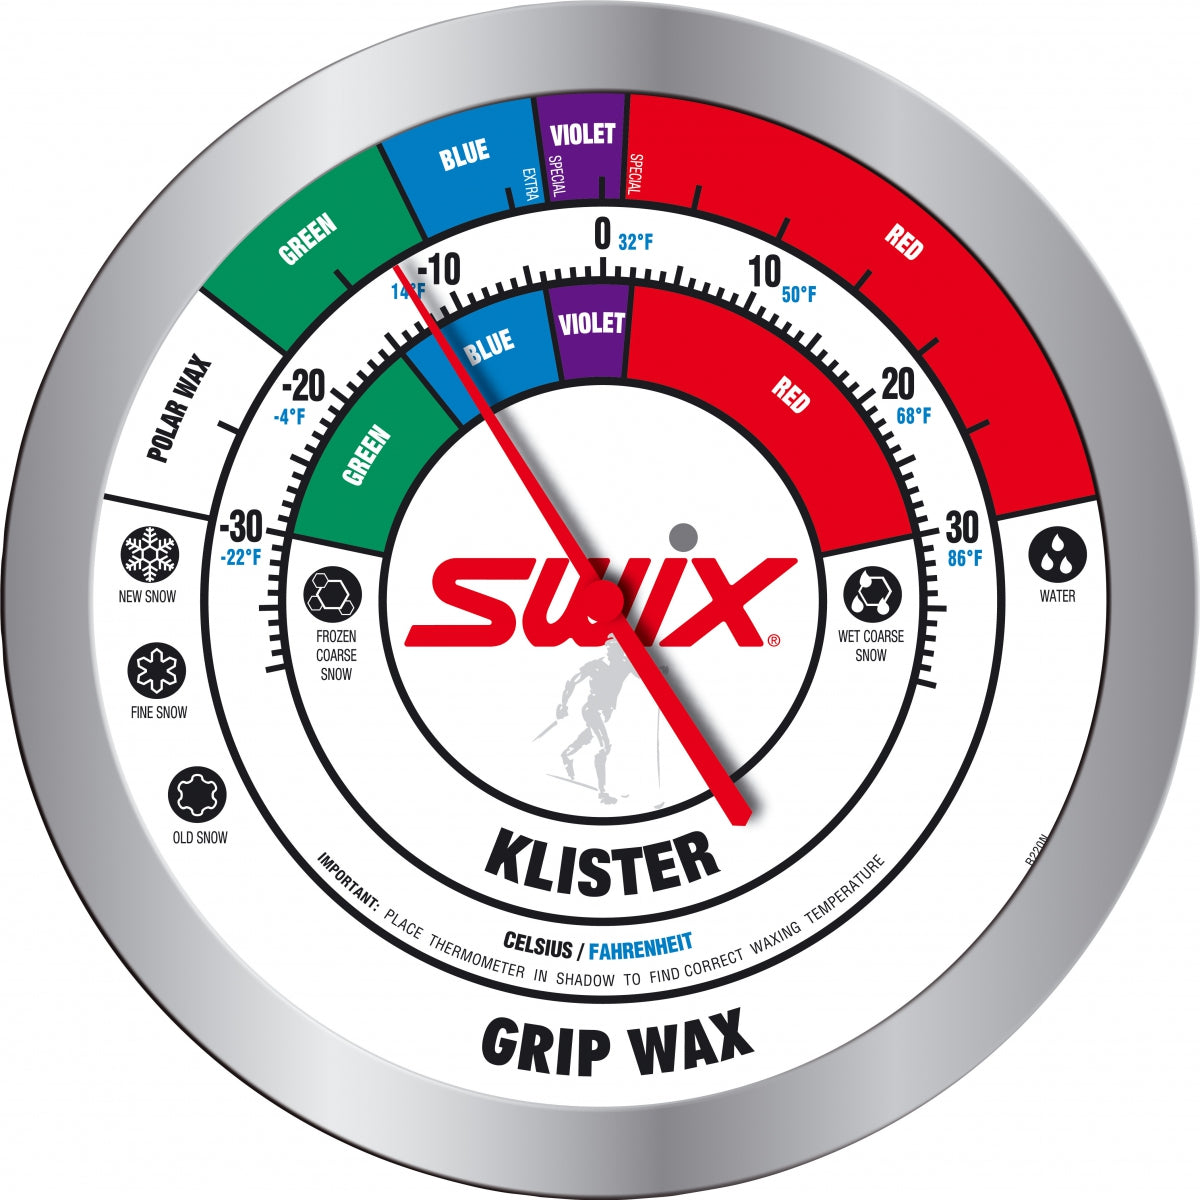 R210 Swix Rectangular Wall Thermometer – The Nordic Skier